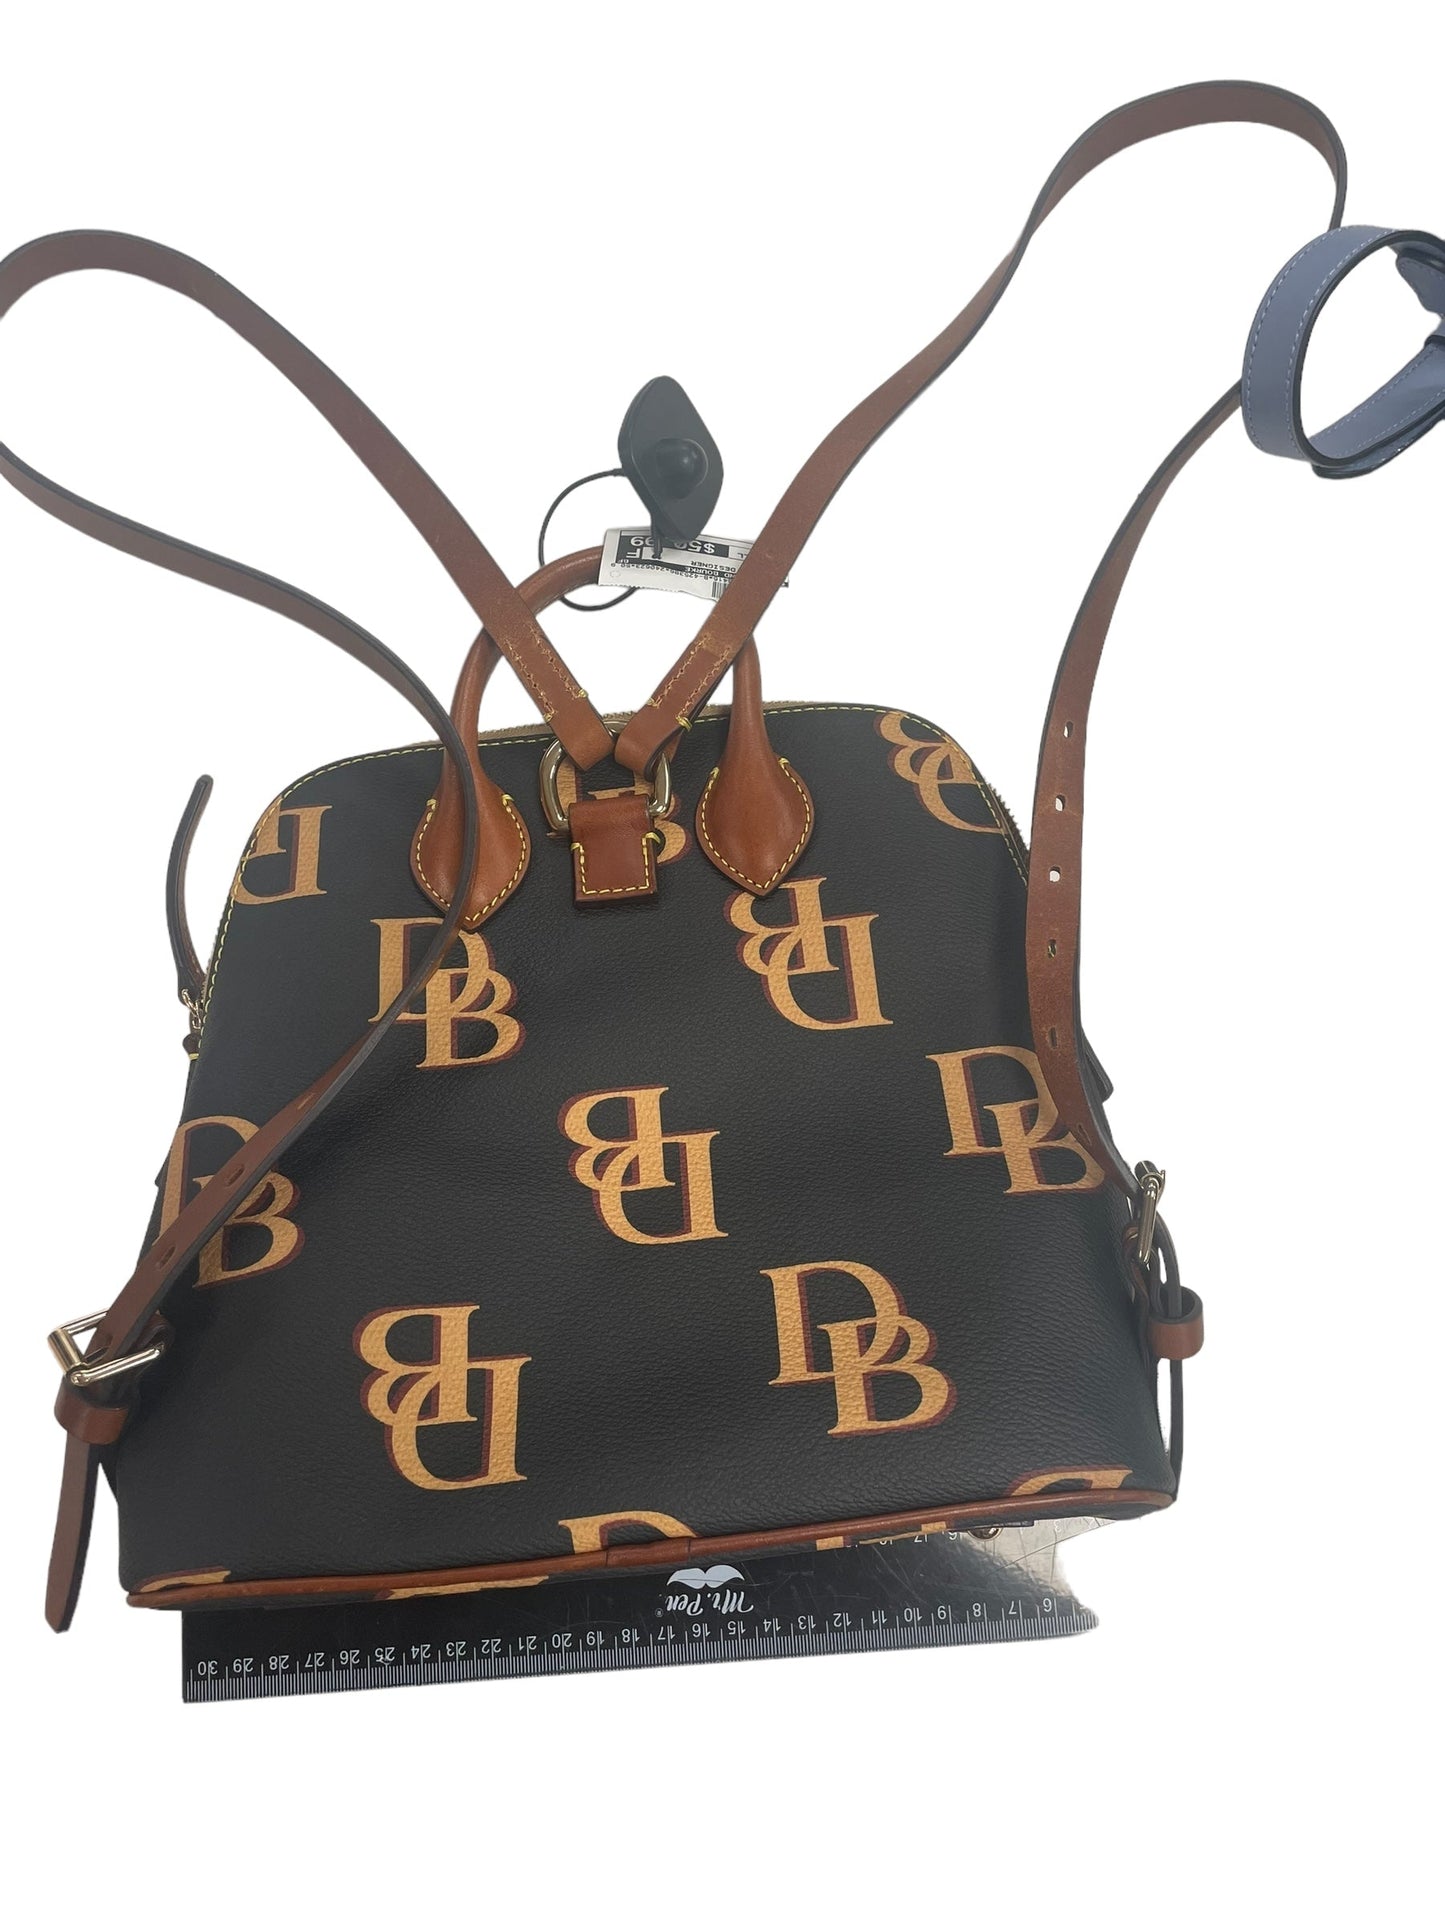 Backpack Designer Dooney And Bourke, Size Small